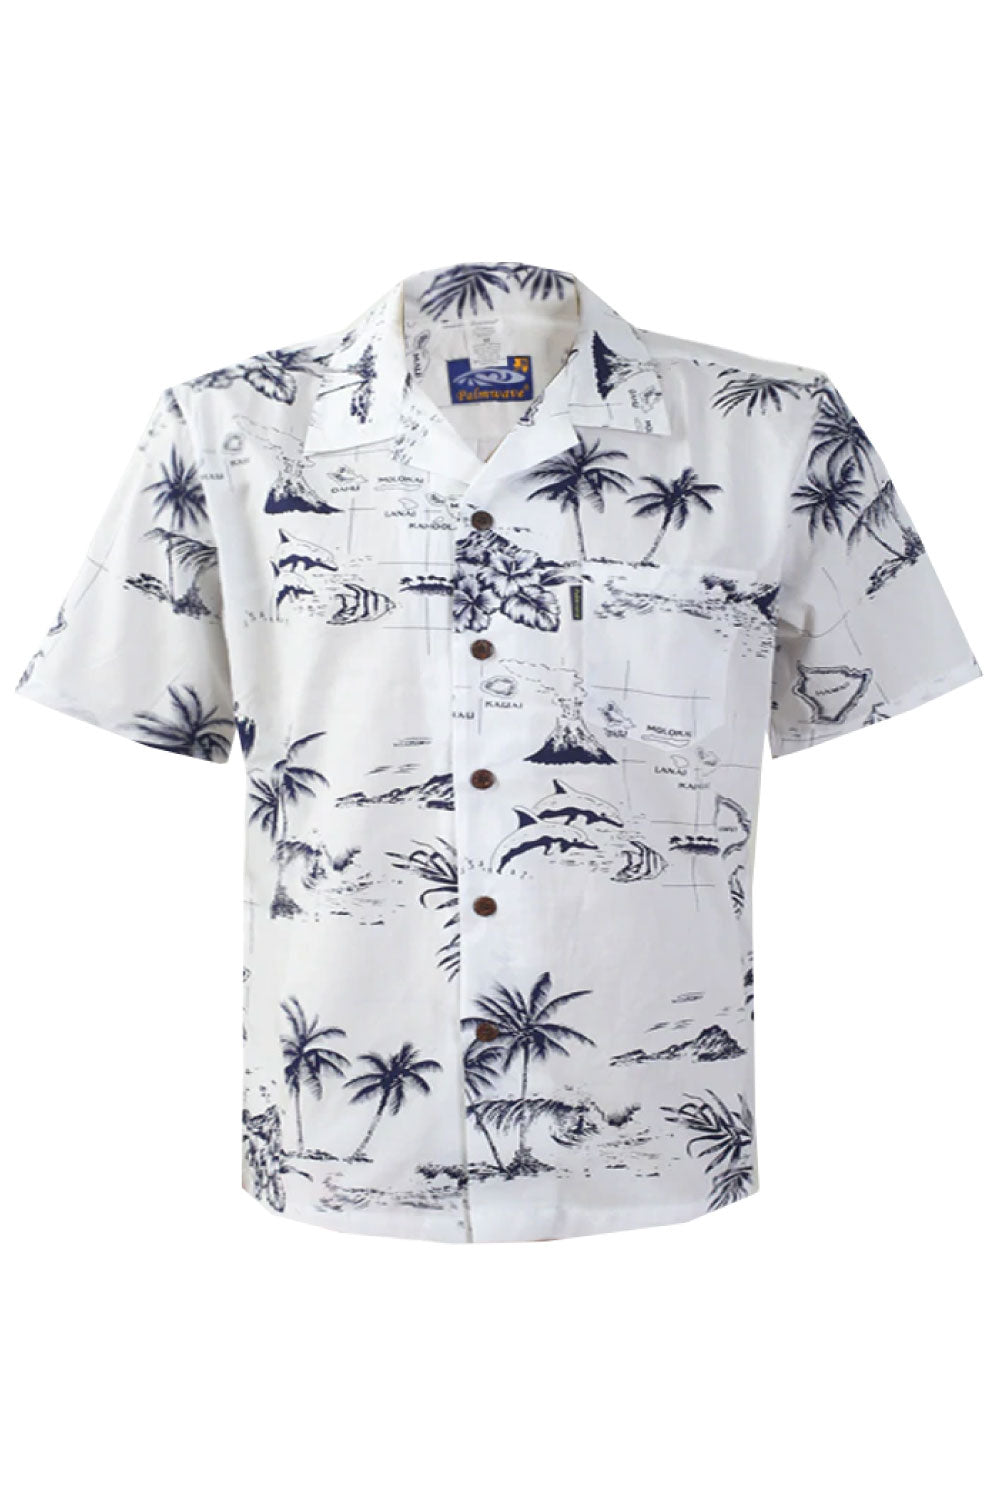 Image of the front of Palmwave's White Map Aloha Men's Shirt.